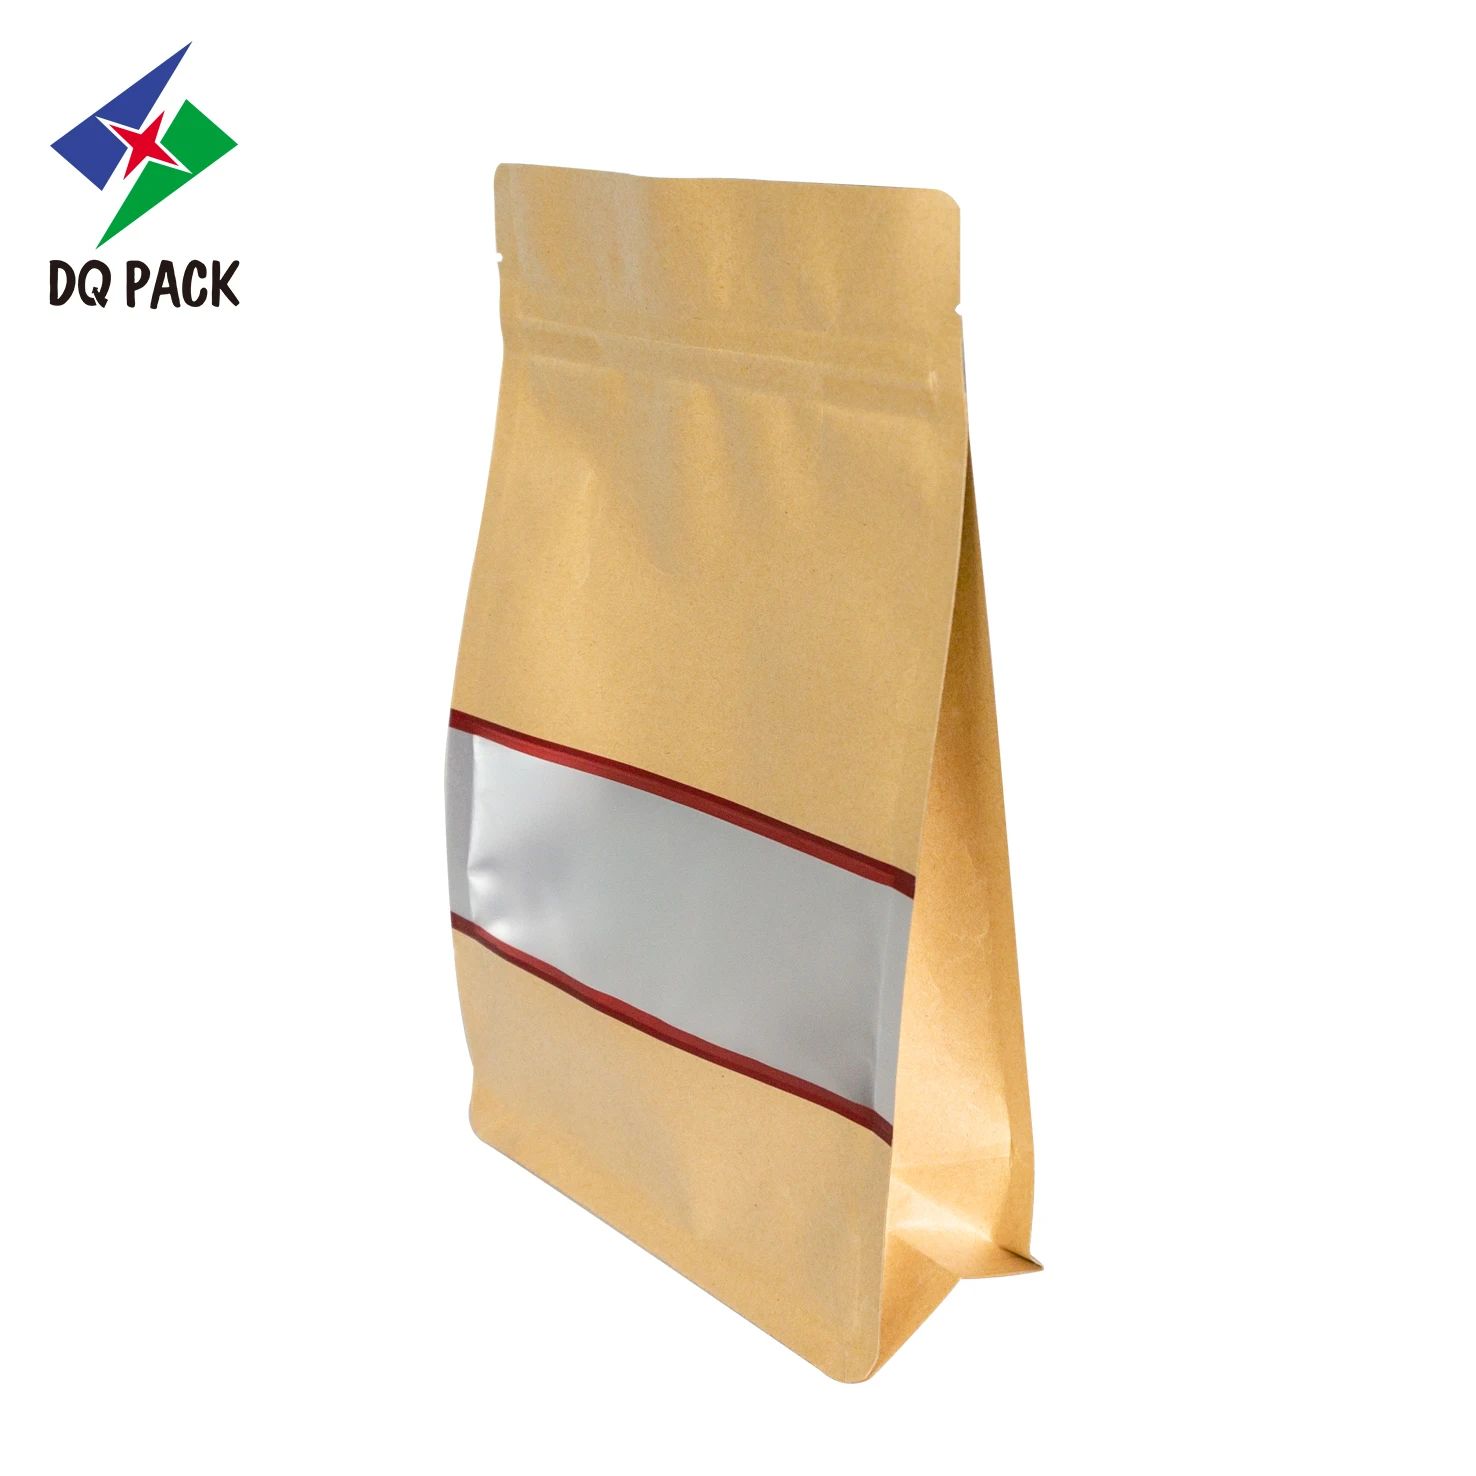 DQ PACK stand up packaging doypack with zipper bag kraft paper for food